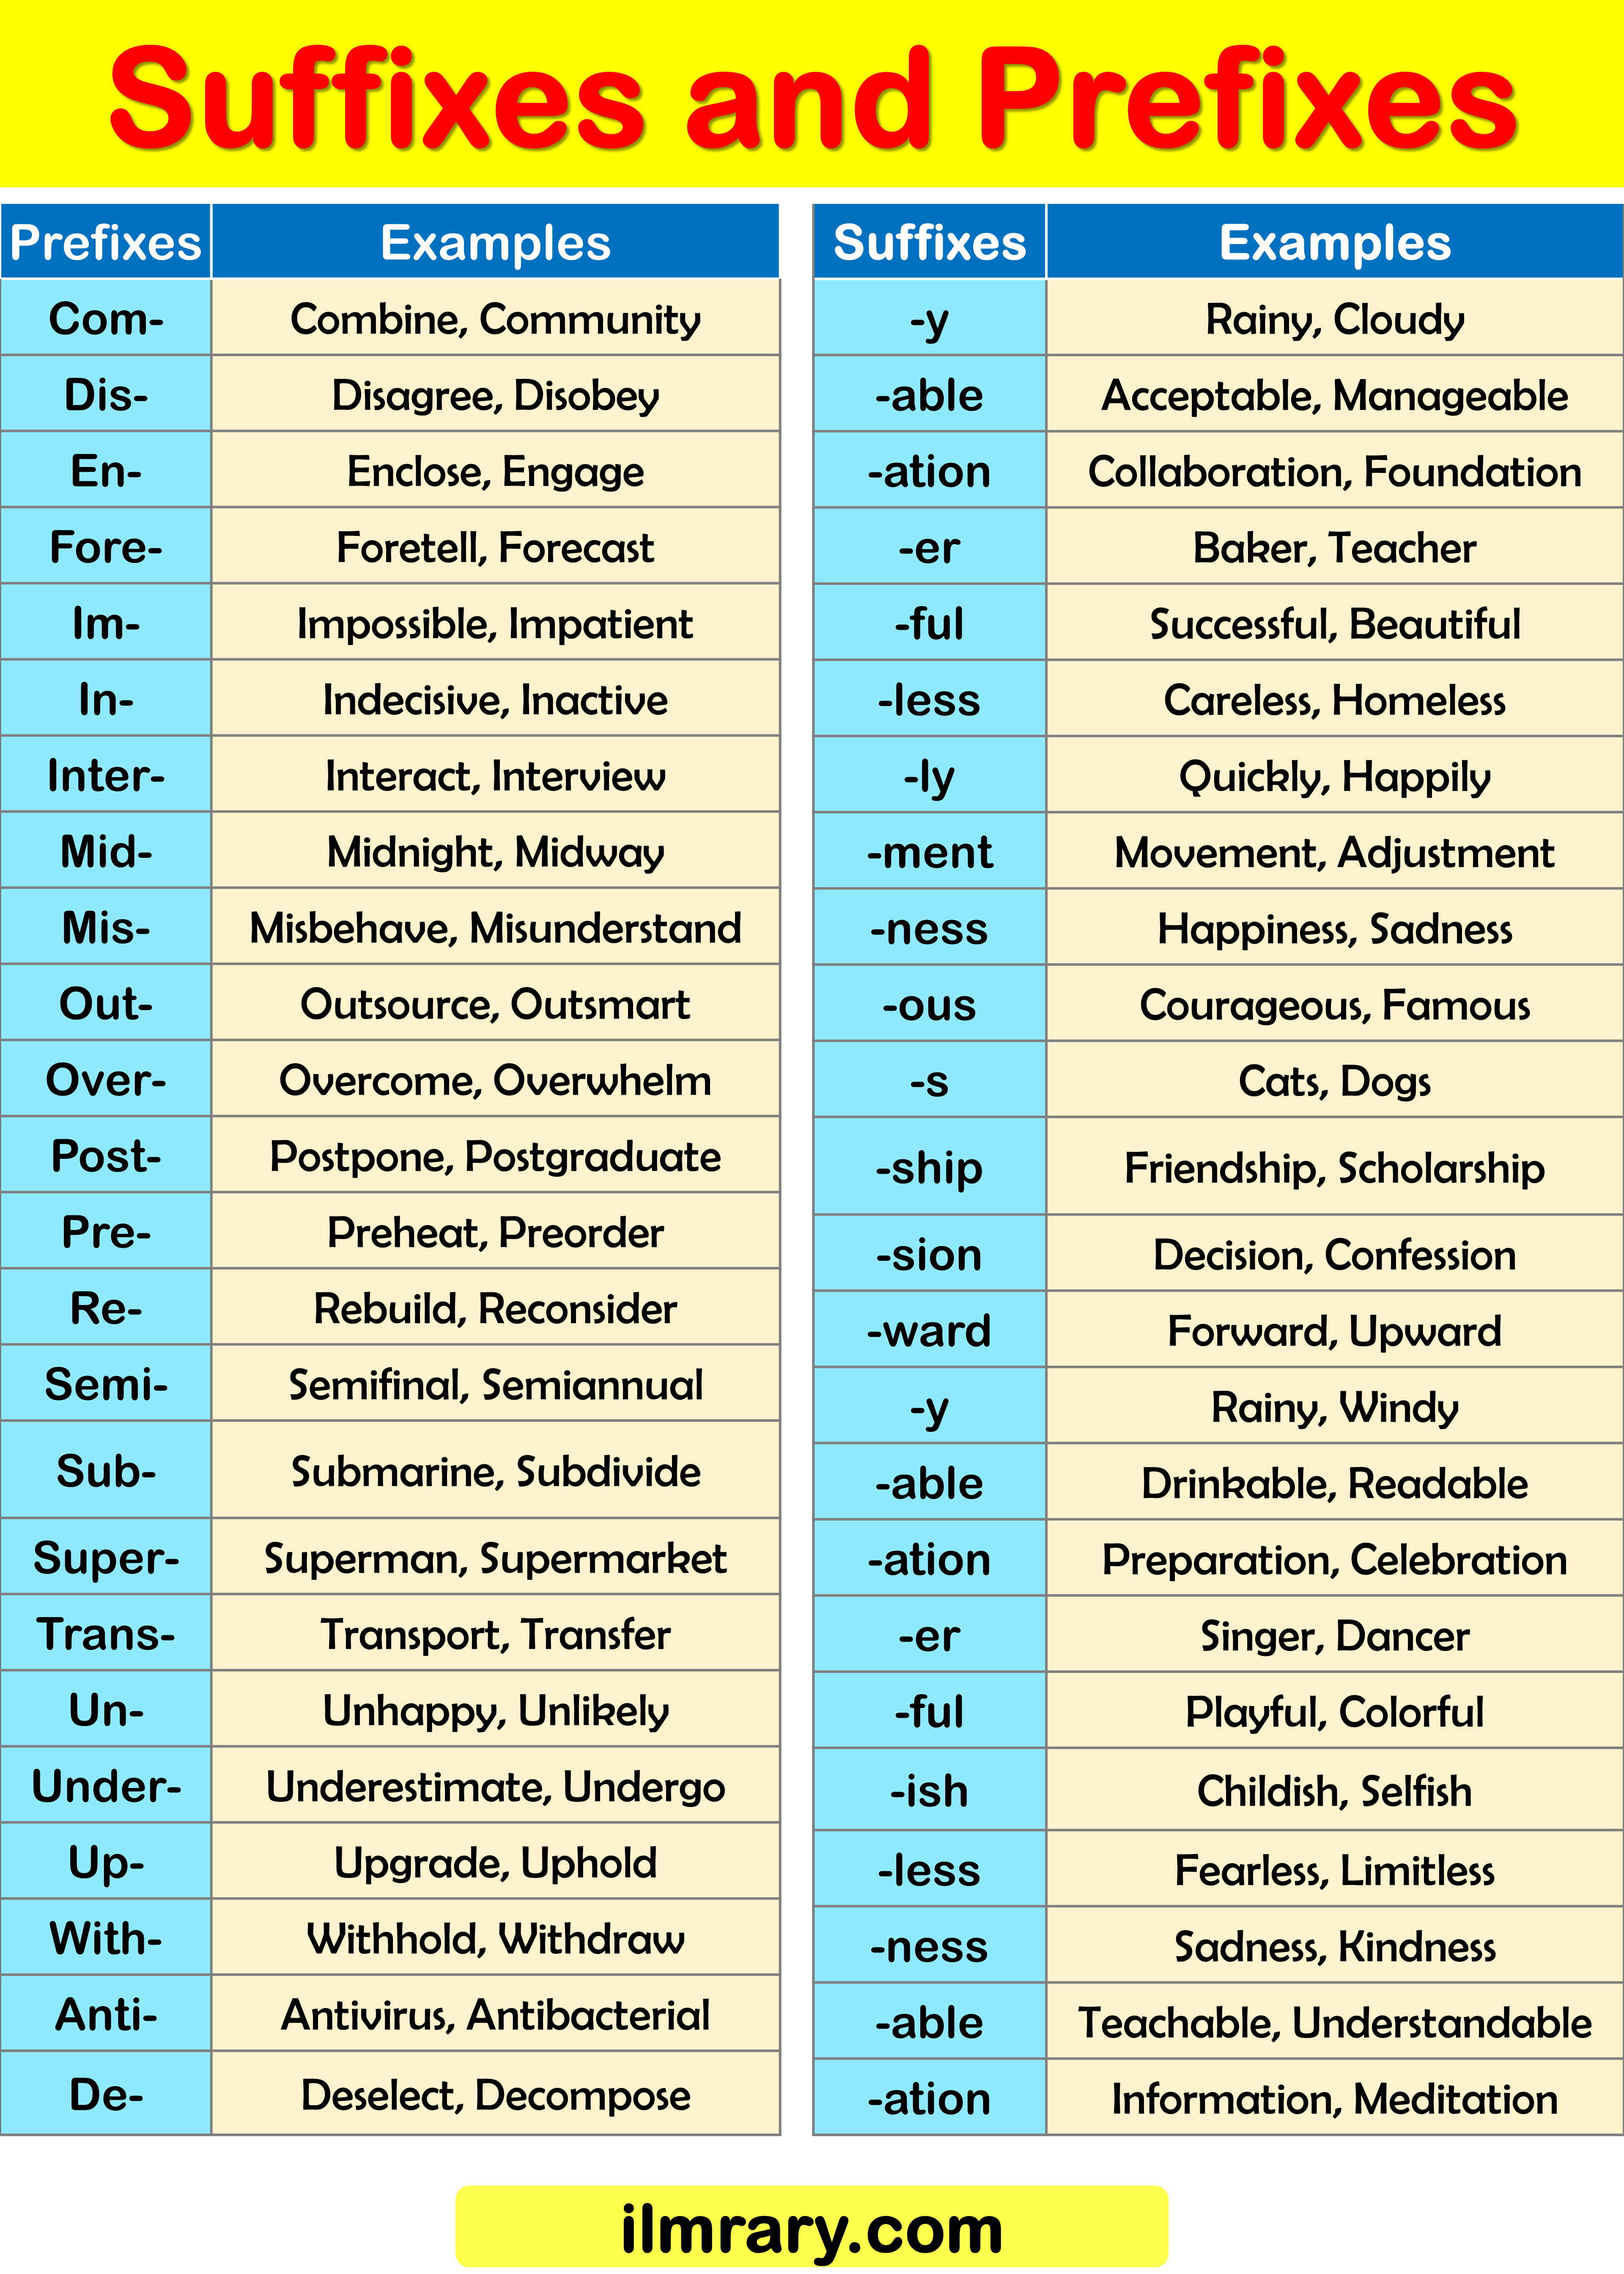 100 Suffixes and Prefixes Examples in English